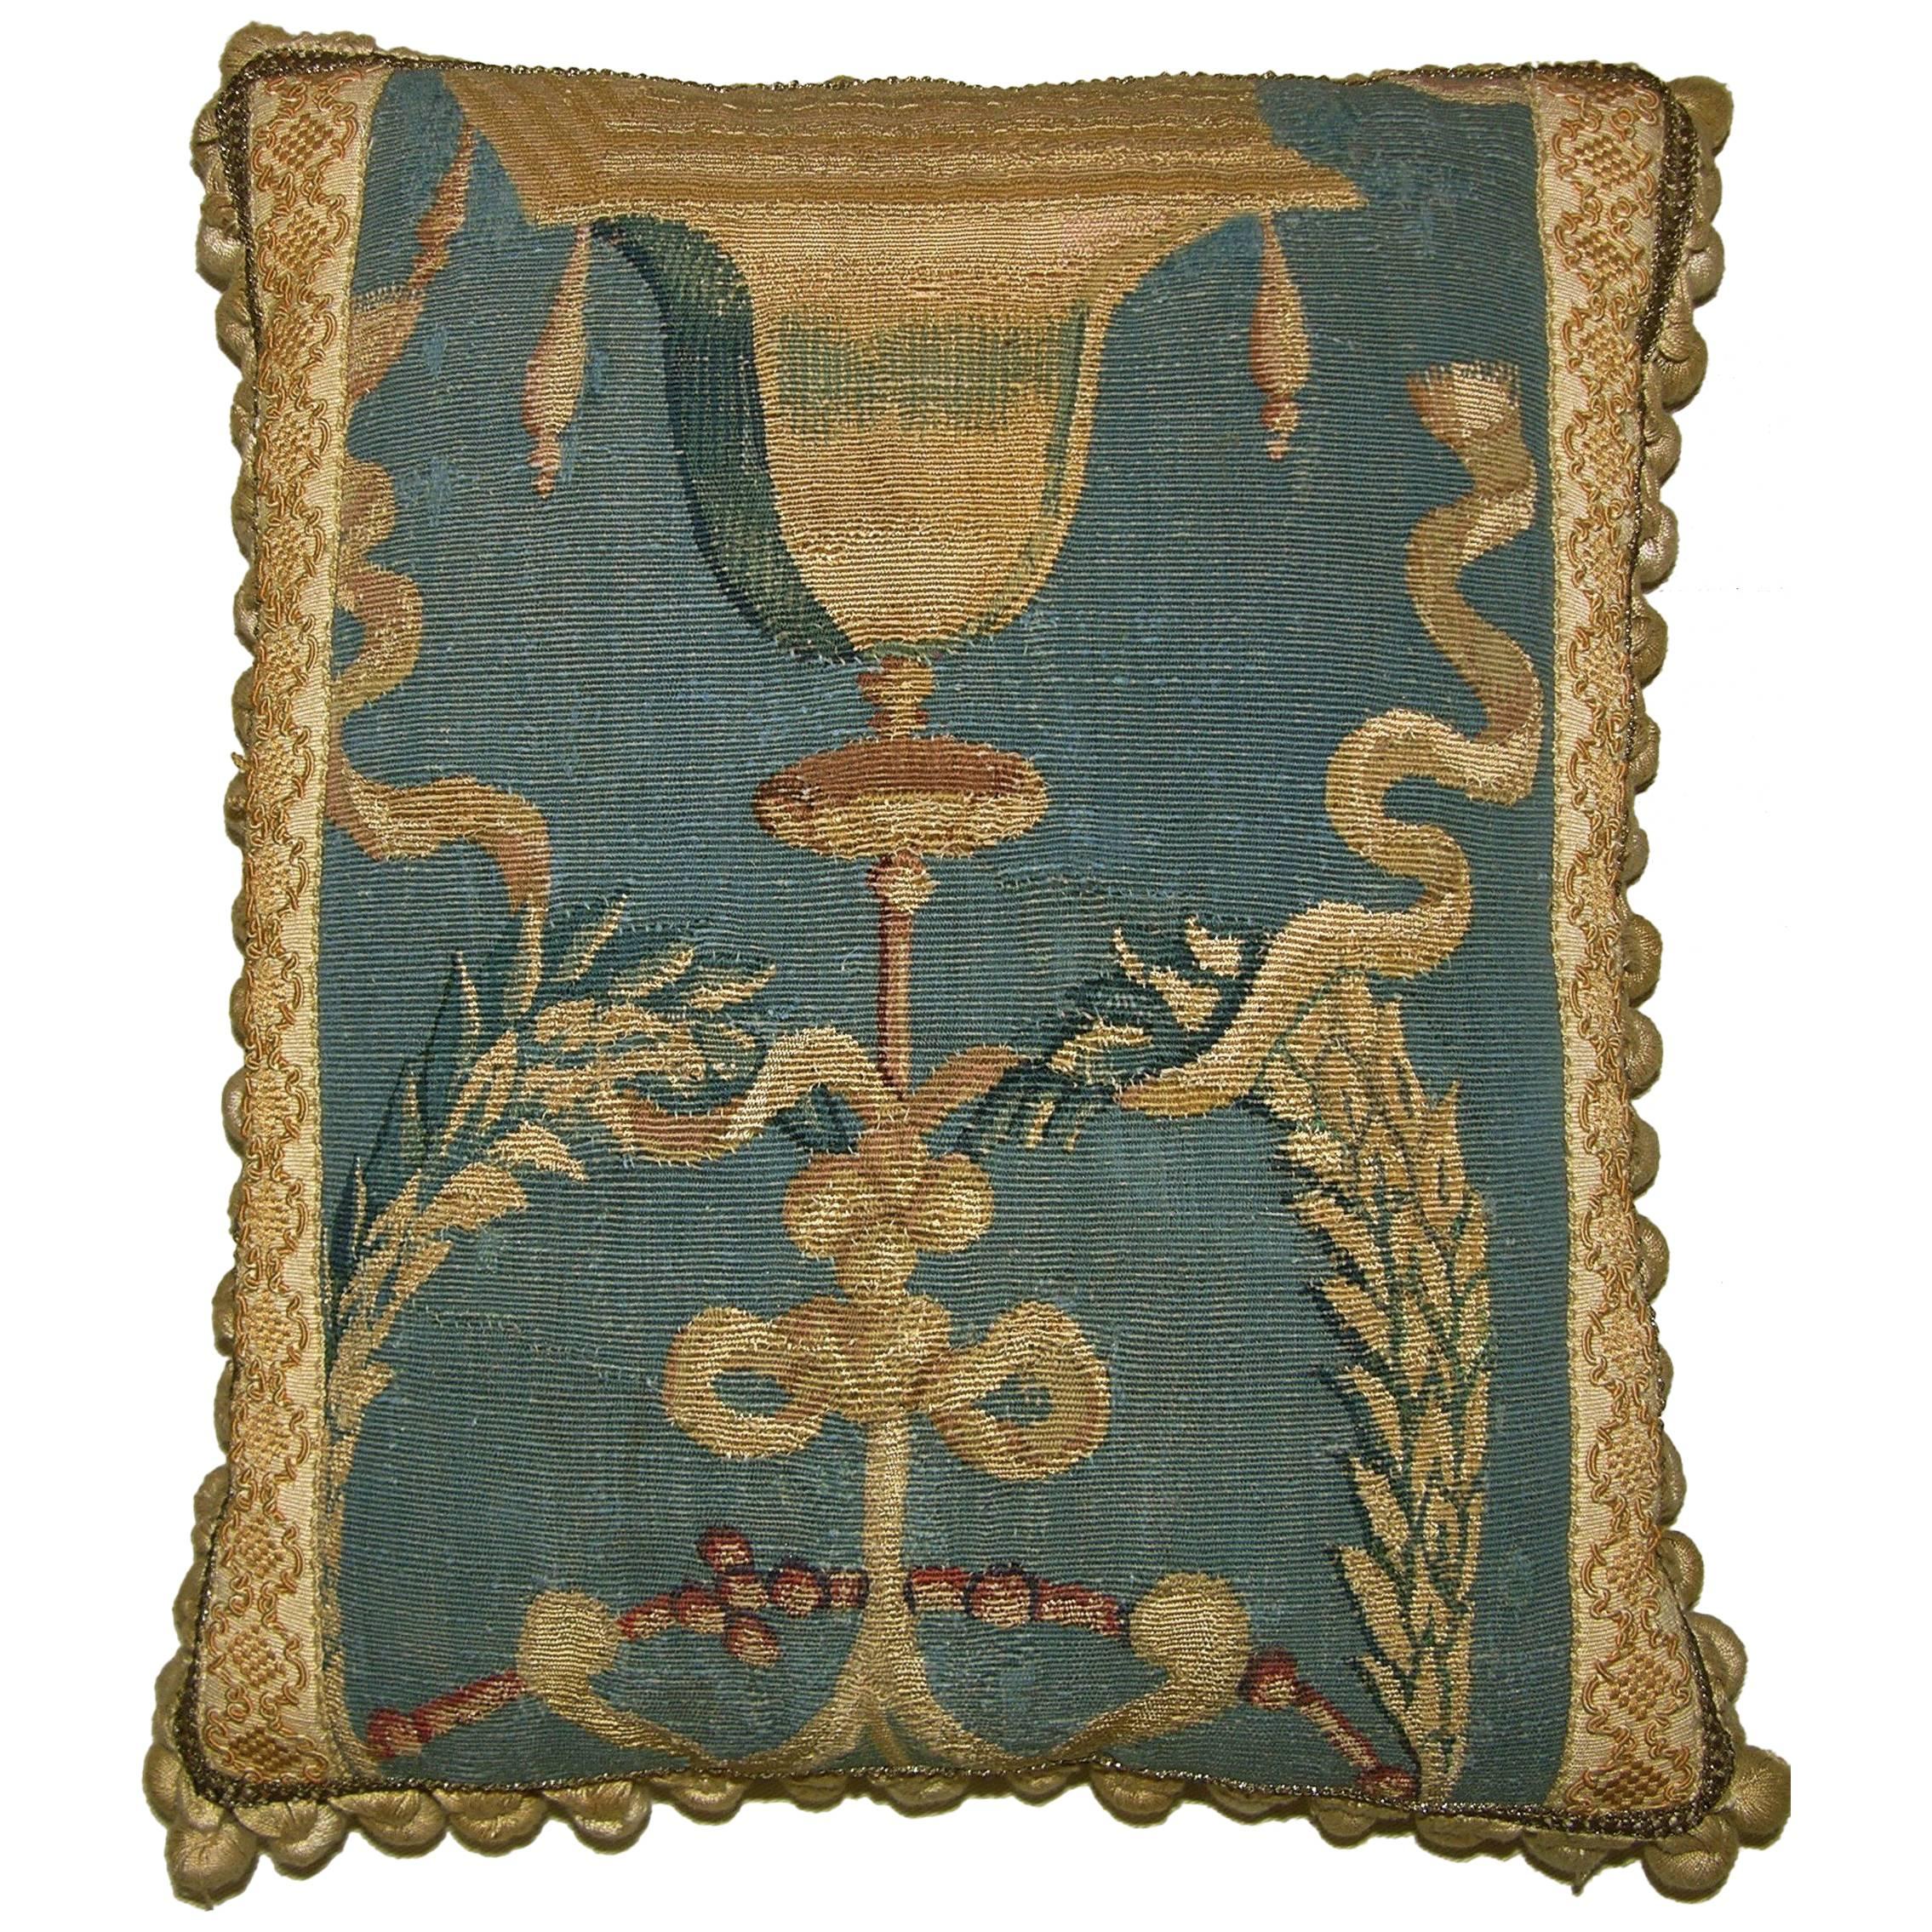 Antique French Tapestry Pillow, circa 1720